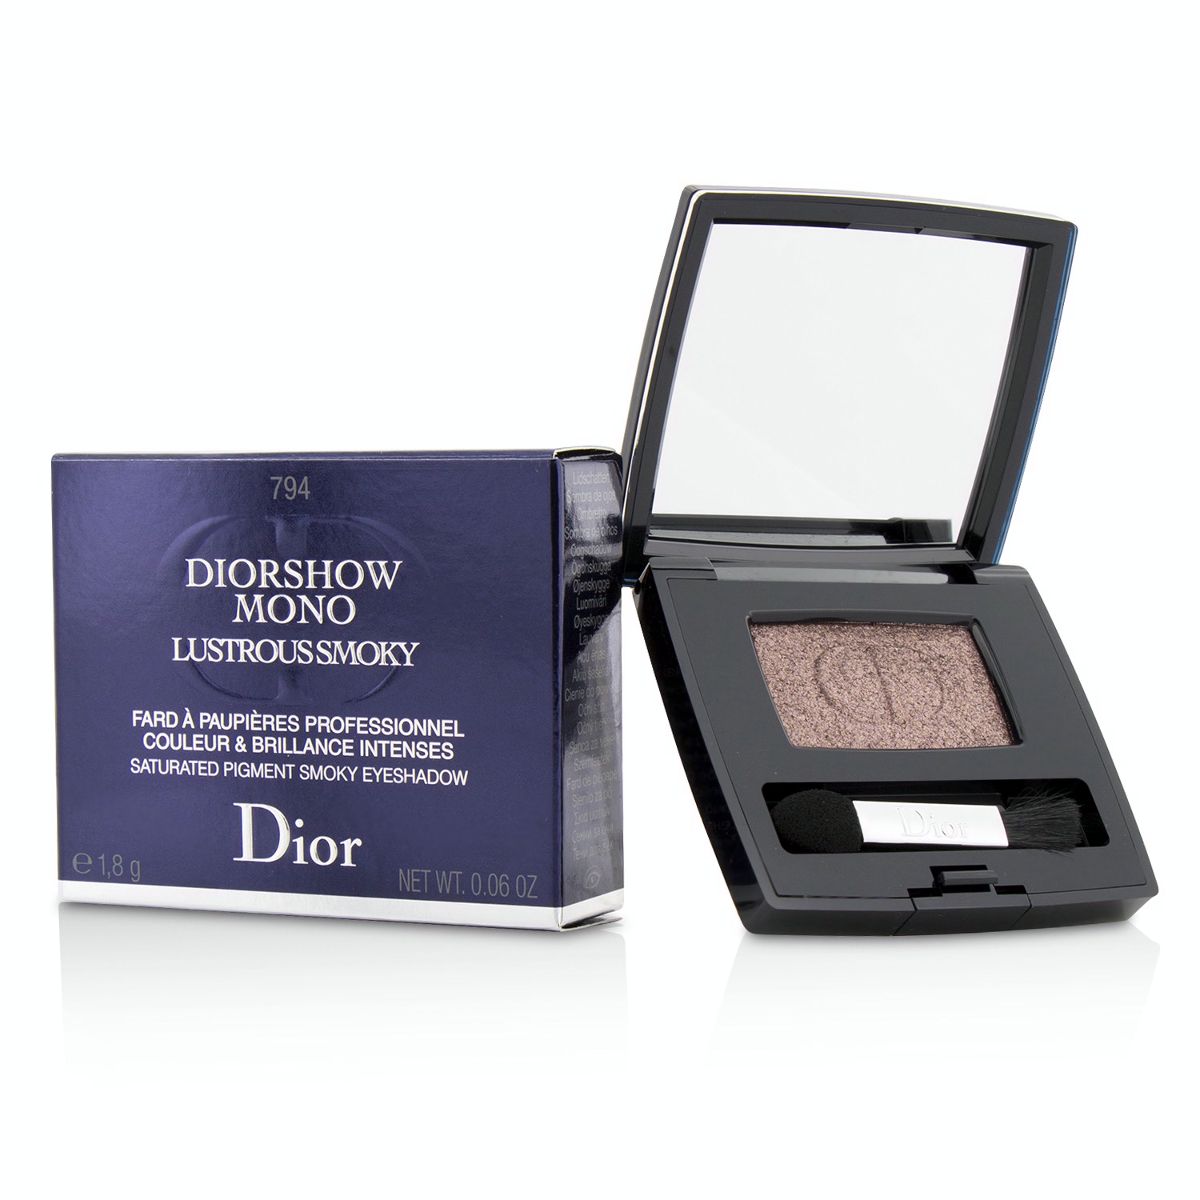 Diorshow Mono Lustrous Smoky Saturated Pigment Smoky Eyeshadow - # 794 Fever Christian Dior Image